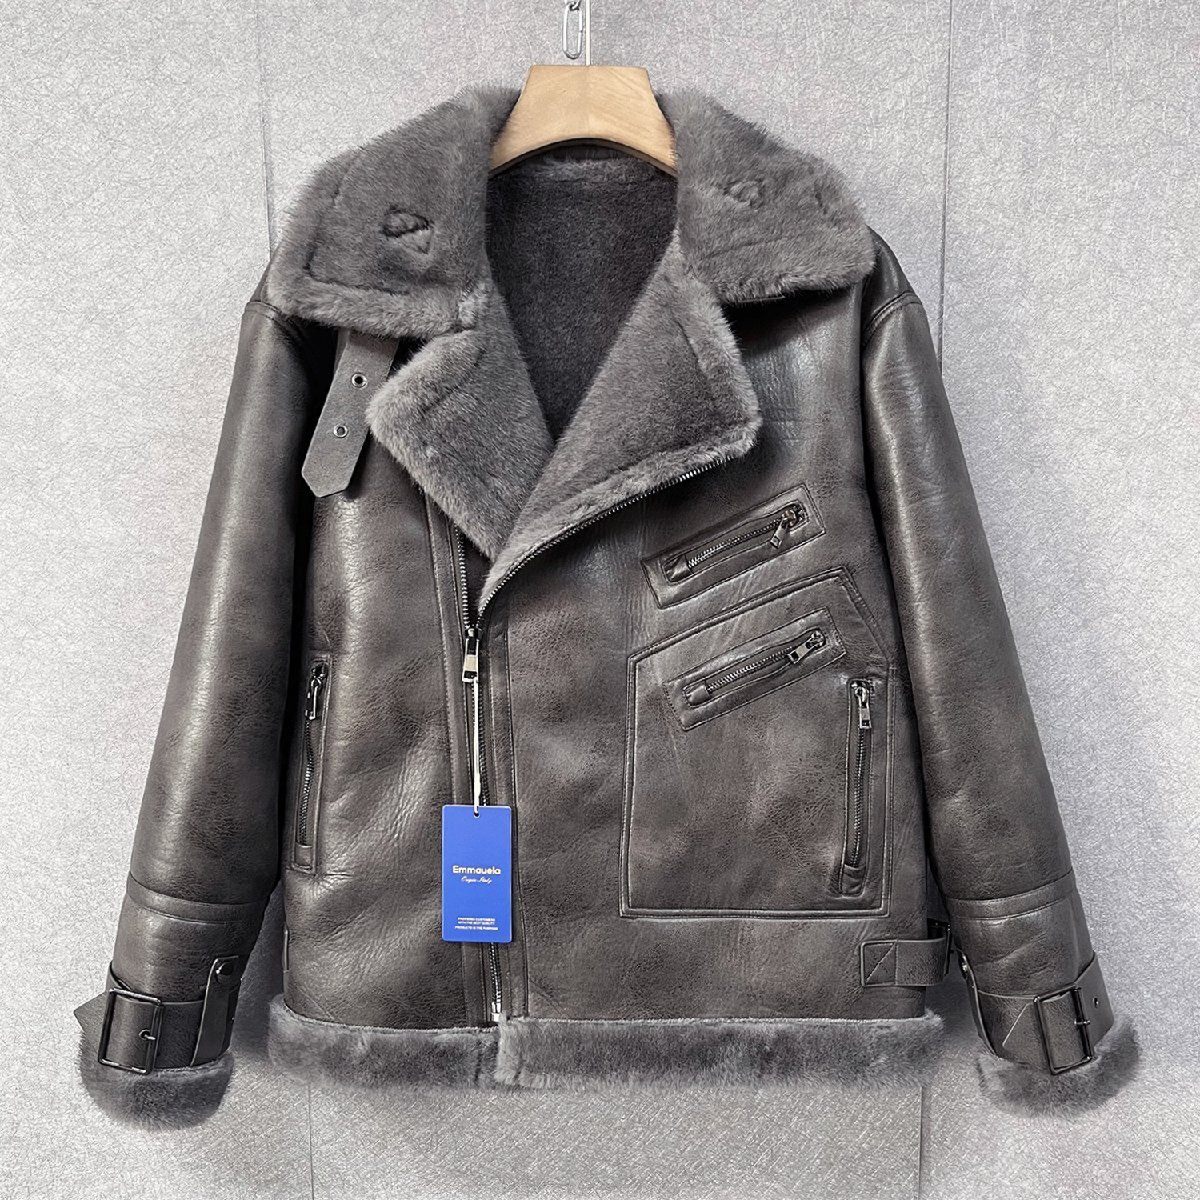  gorgeous * leather jacket regular price 8 ten thousand *Emmauela* Italy * milano departure *boma- high class sheepskin original leather -ply thickness protection against cold Rider's bike autumn winter L/48 size 